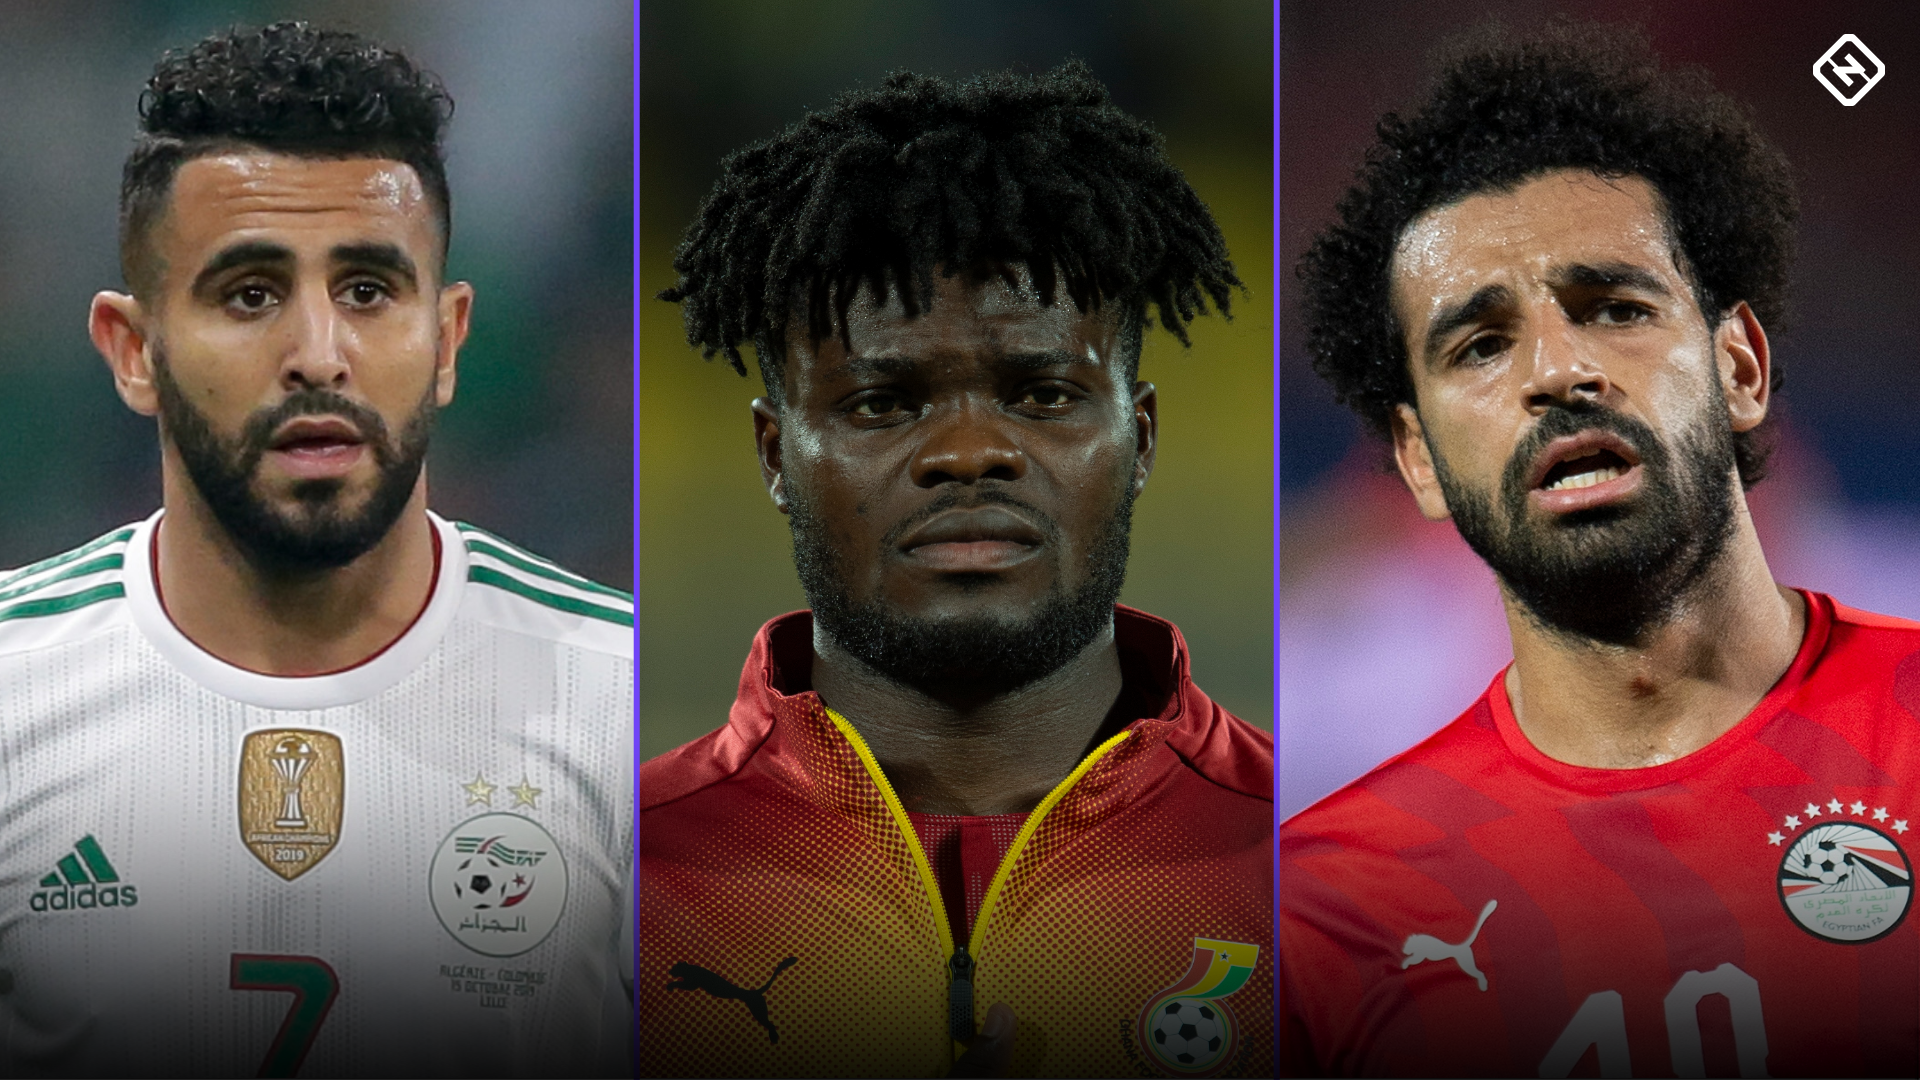 Premier League players at CAN 2022: the stars of Salah, Mane and EPL in action and on their return